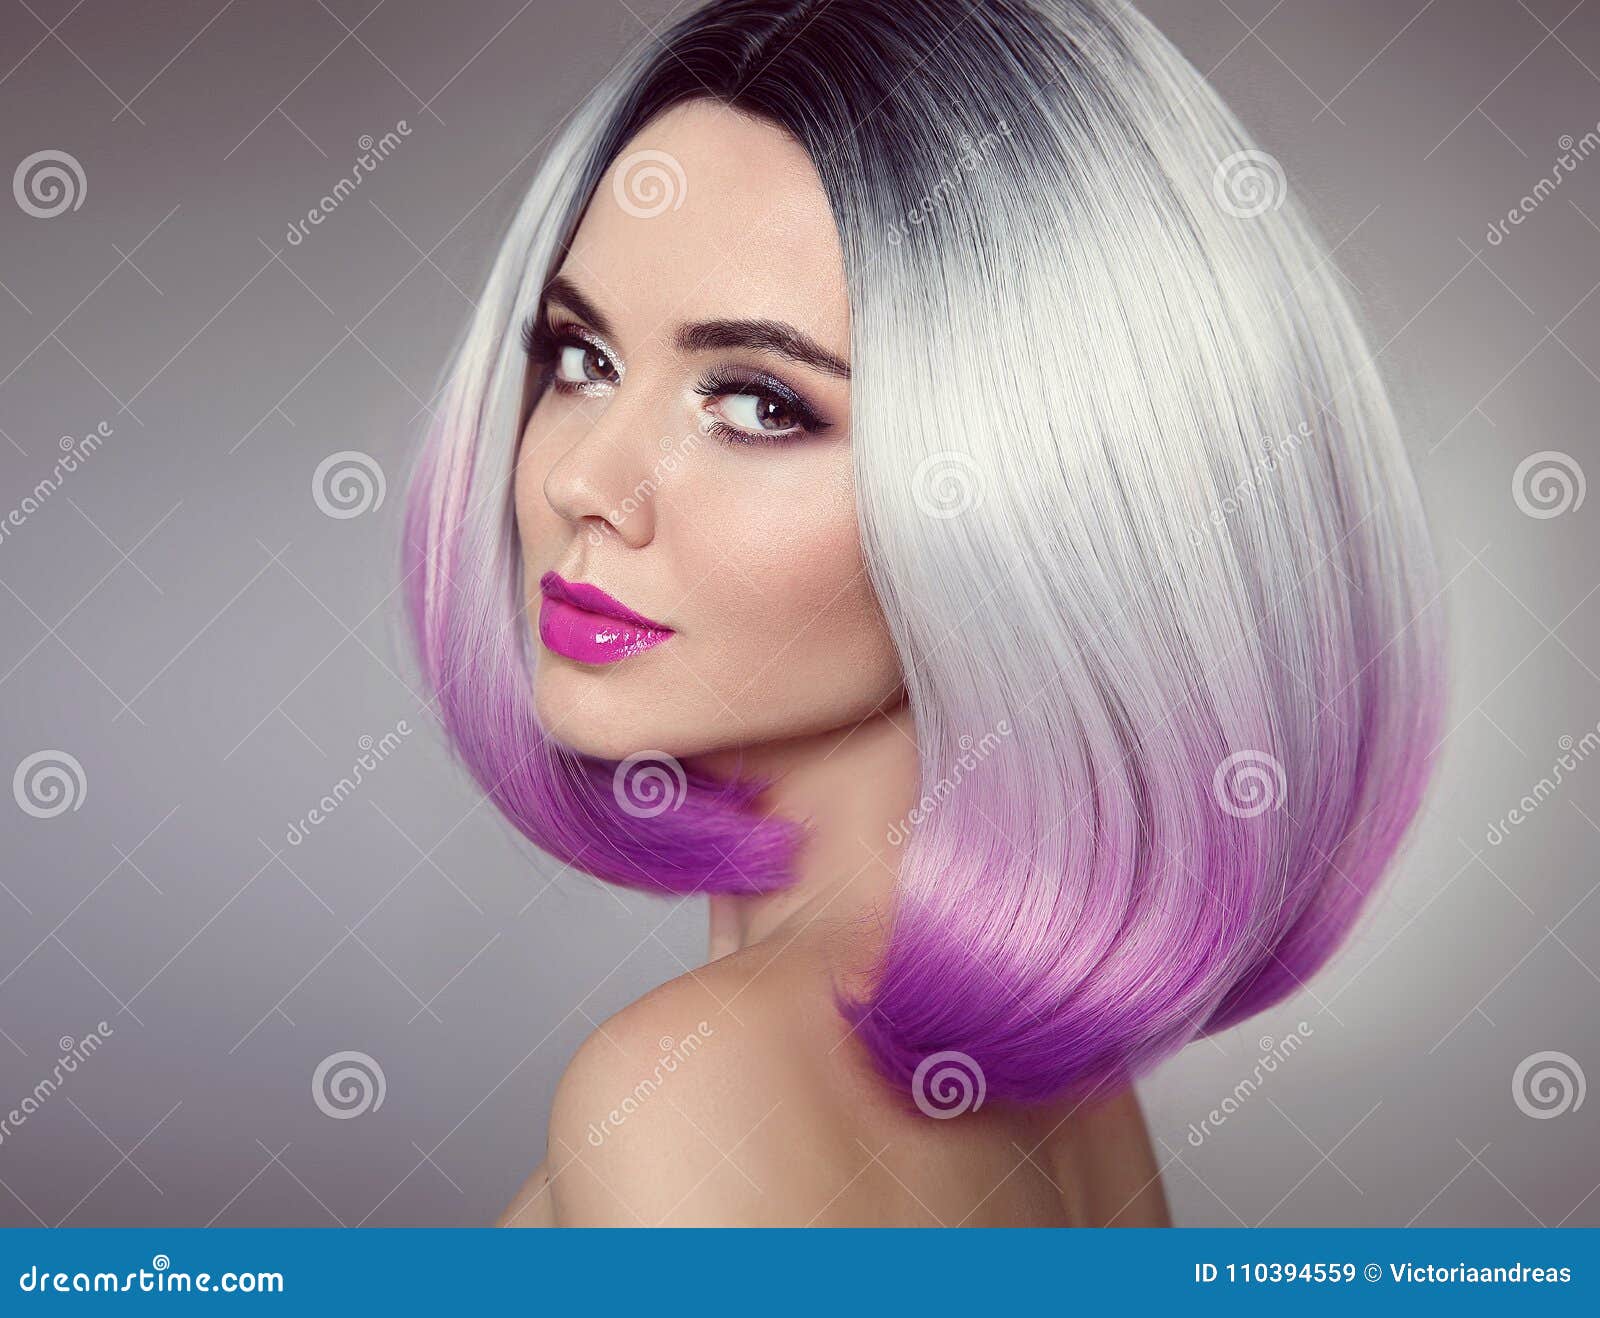 bob hairstyle. colored ombre hair extensions. beauty model girl